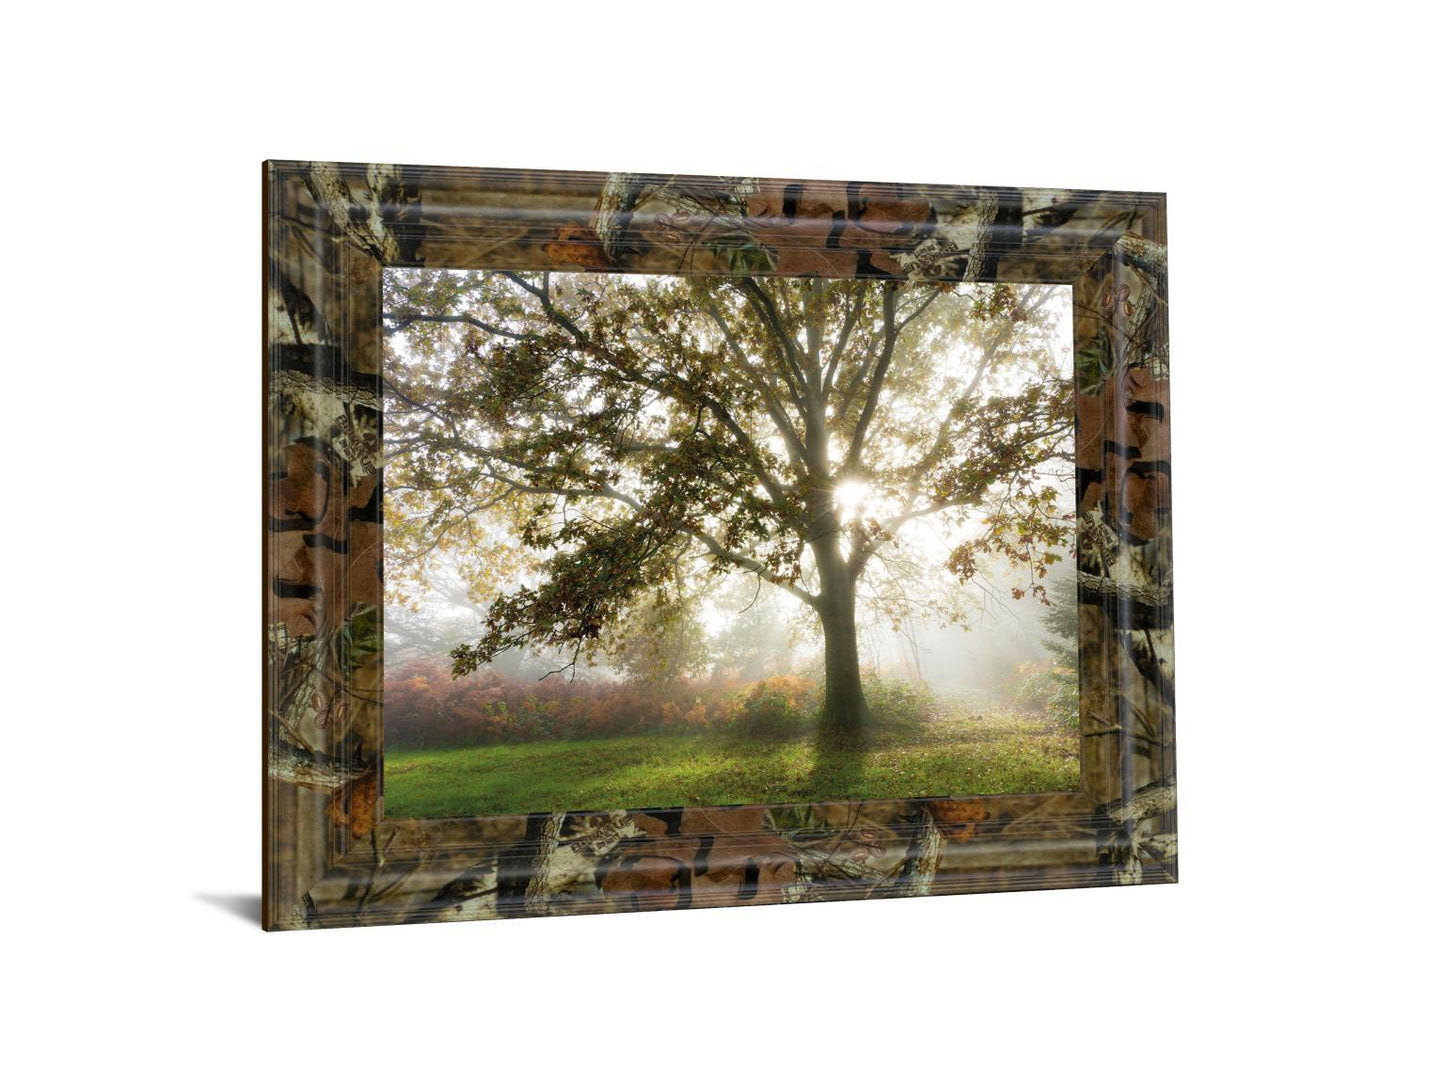 Morning Calm By Lee Frost - Framed Print Wall Art - Green